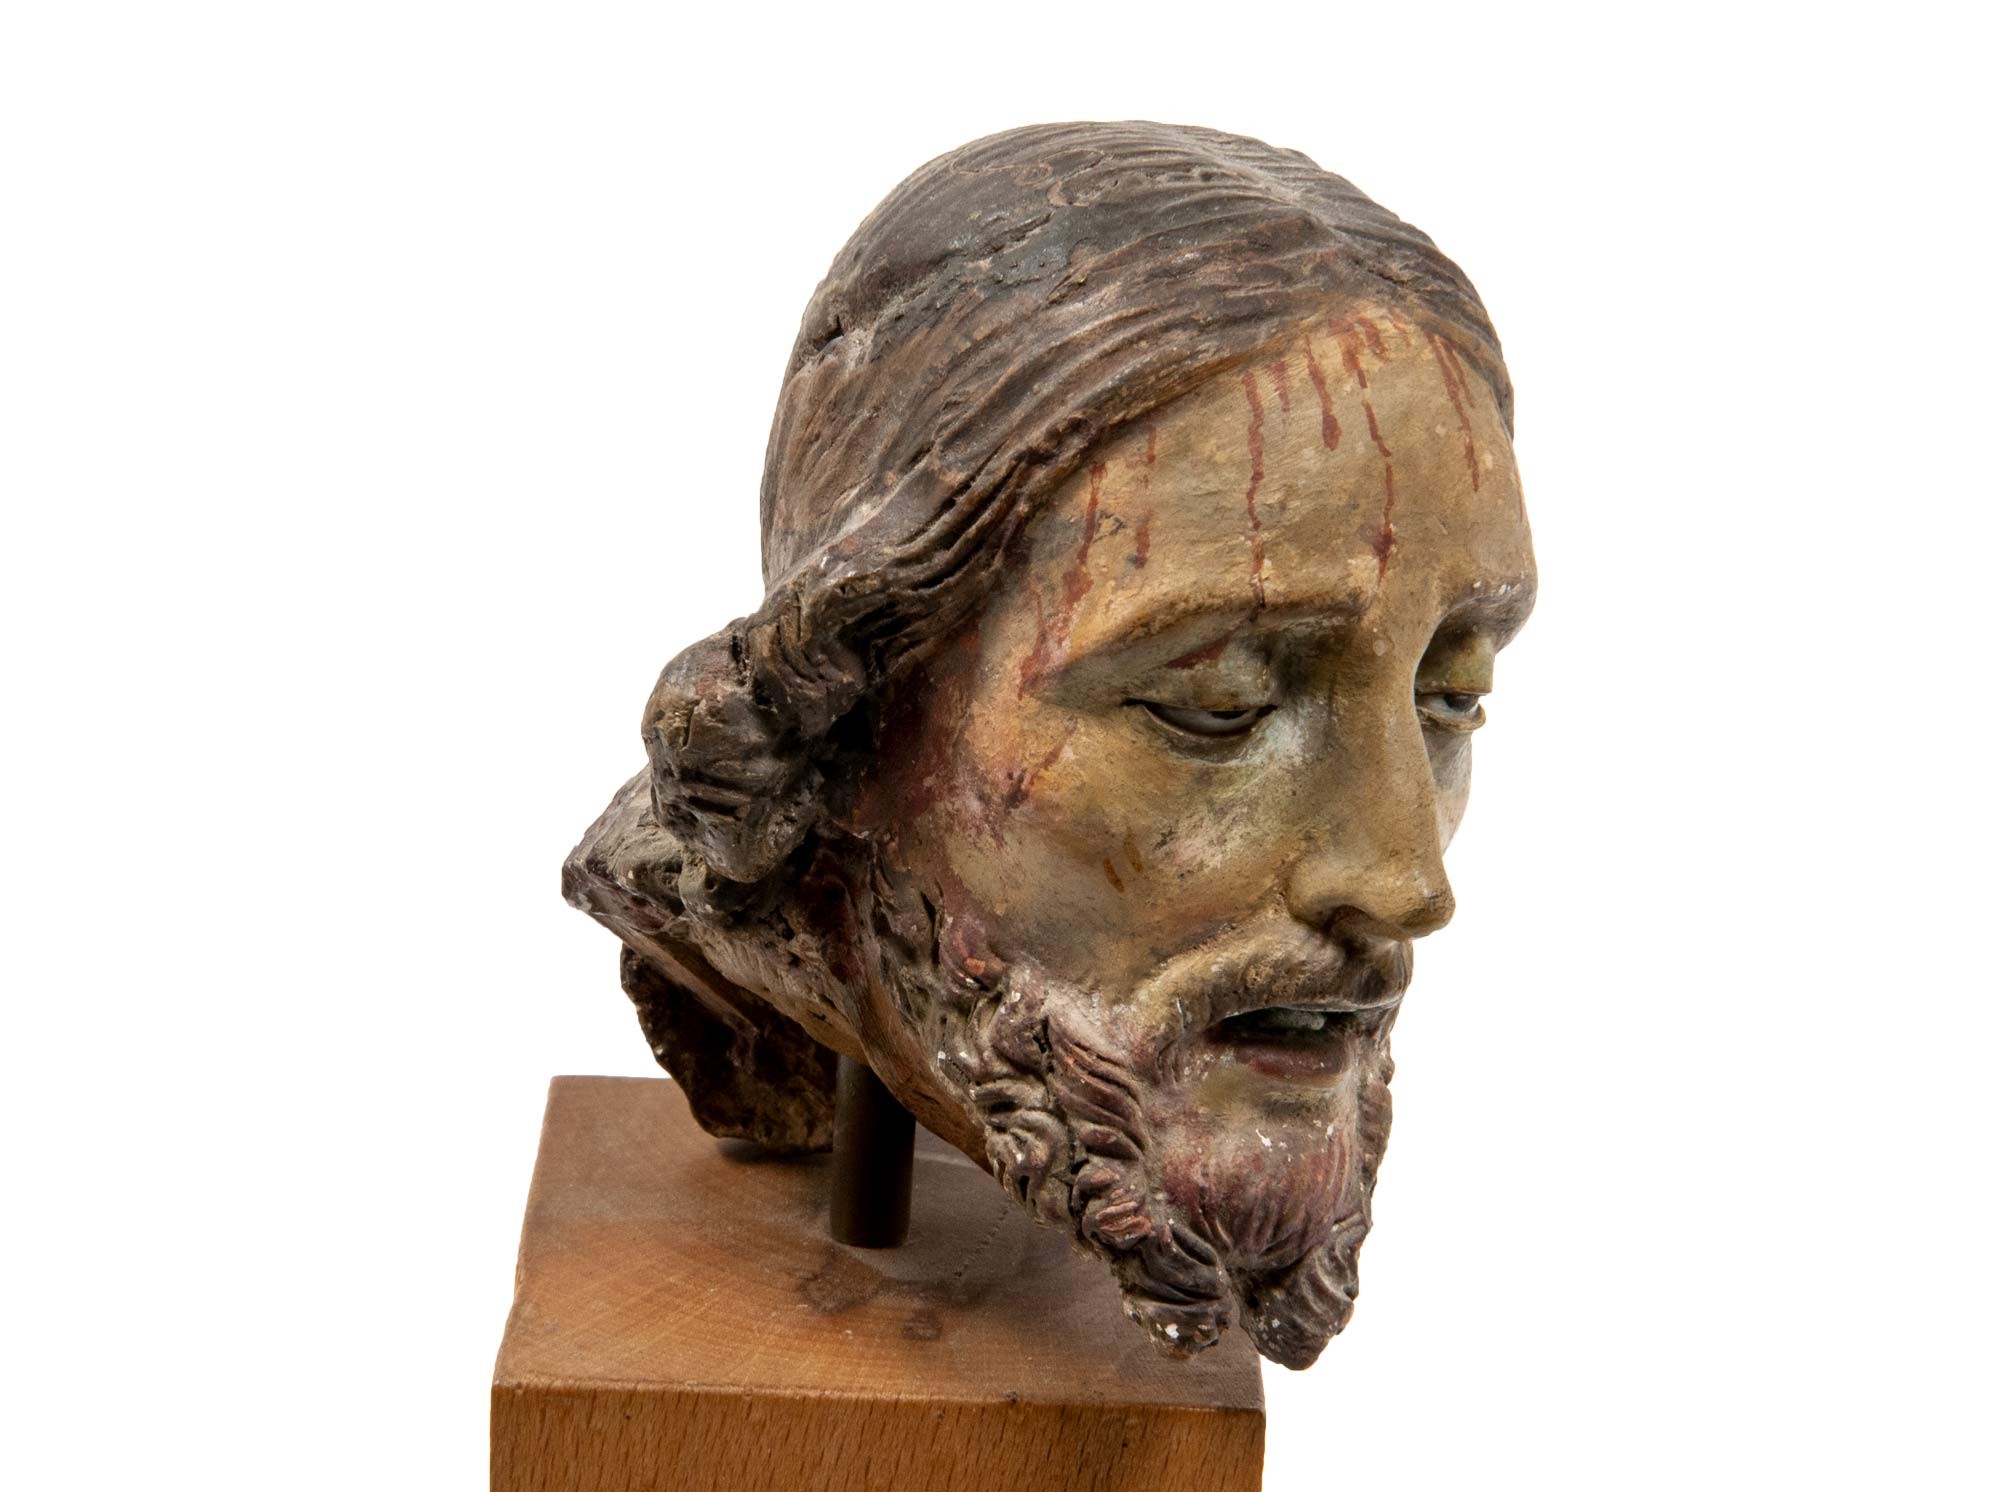 Painted terracotta head of Christ manifacture veneta, 18th century, on the wooden baseh 21 cm - Image 6 of 6